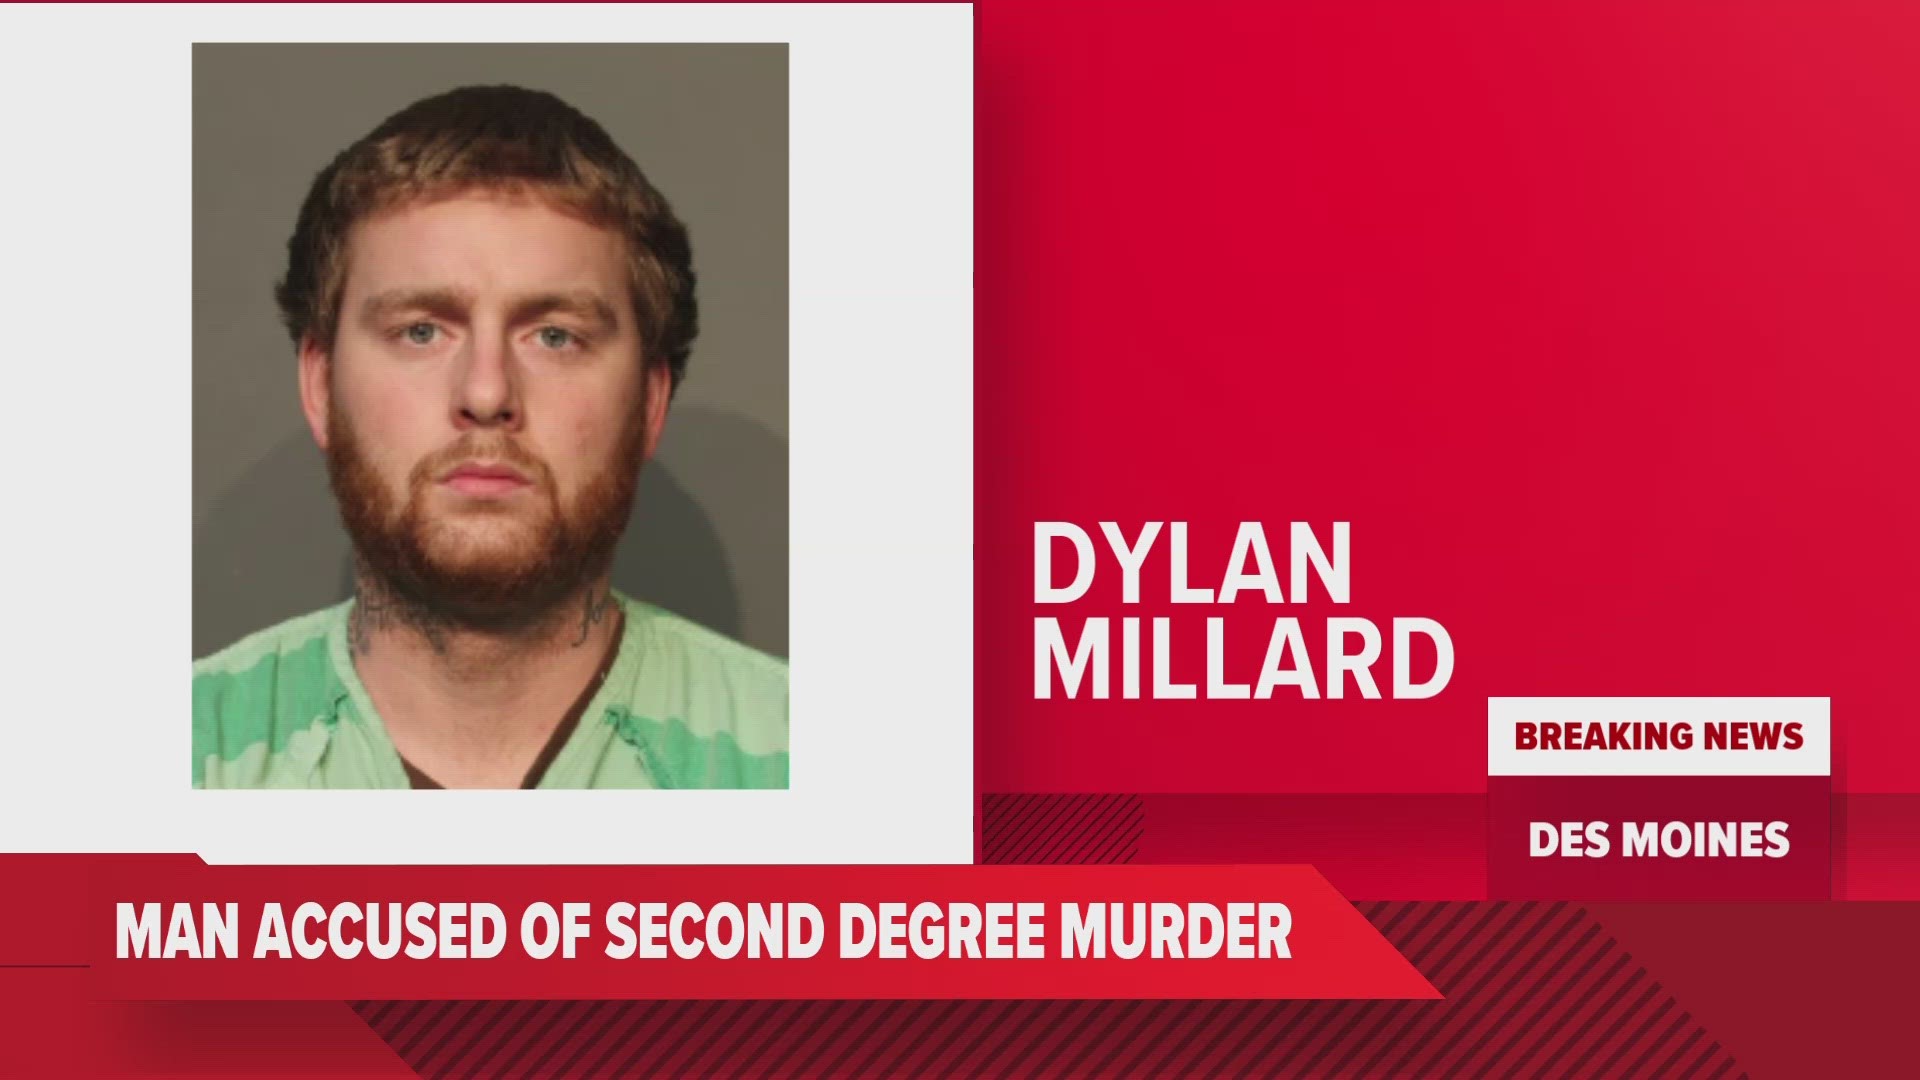 Officers claim 27-year-old Dylan Millard had approached Torres on May 3 and hit him in the head multiple times following a short conversation.